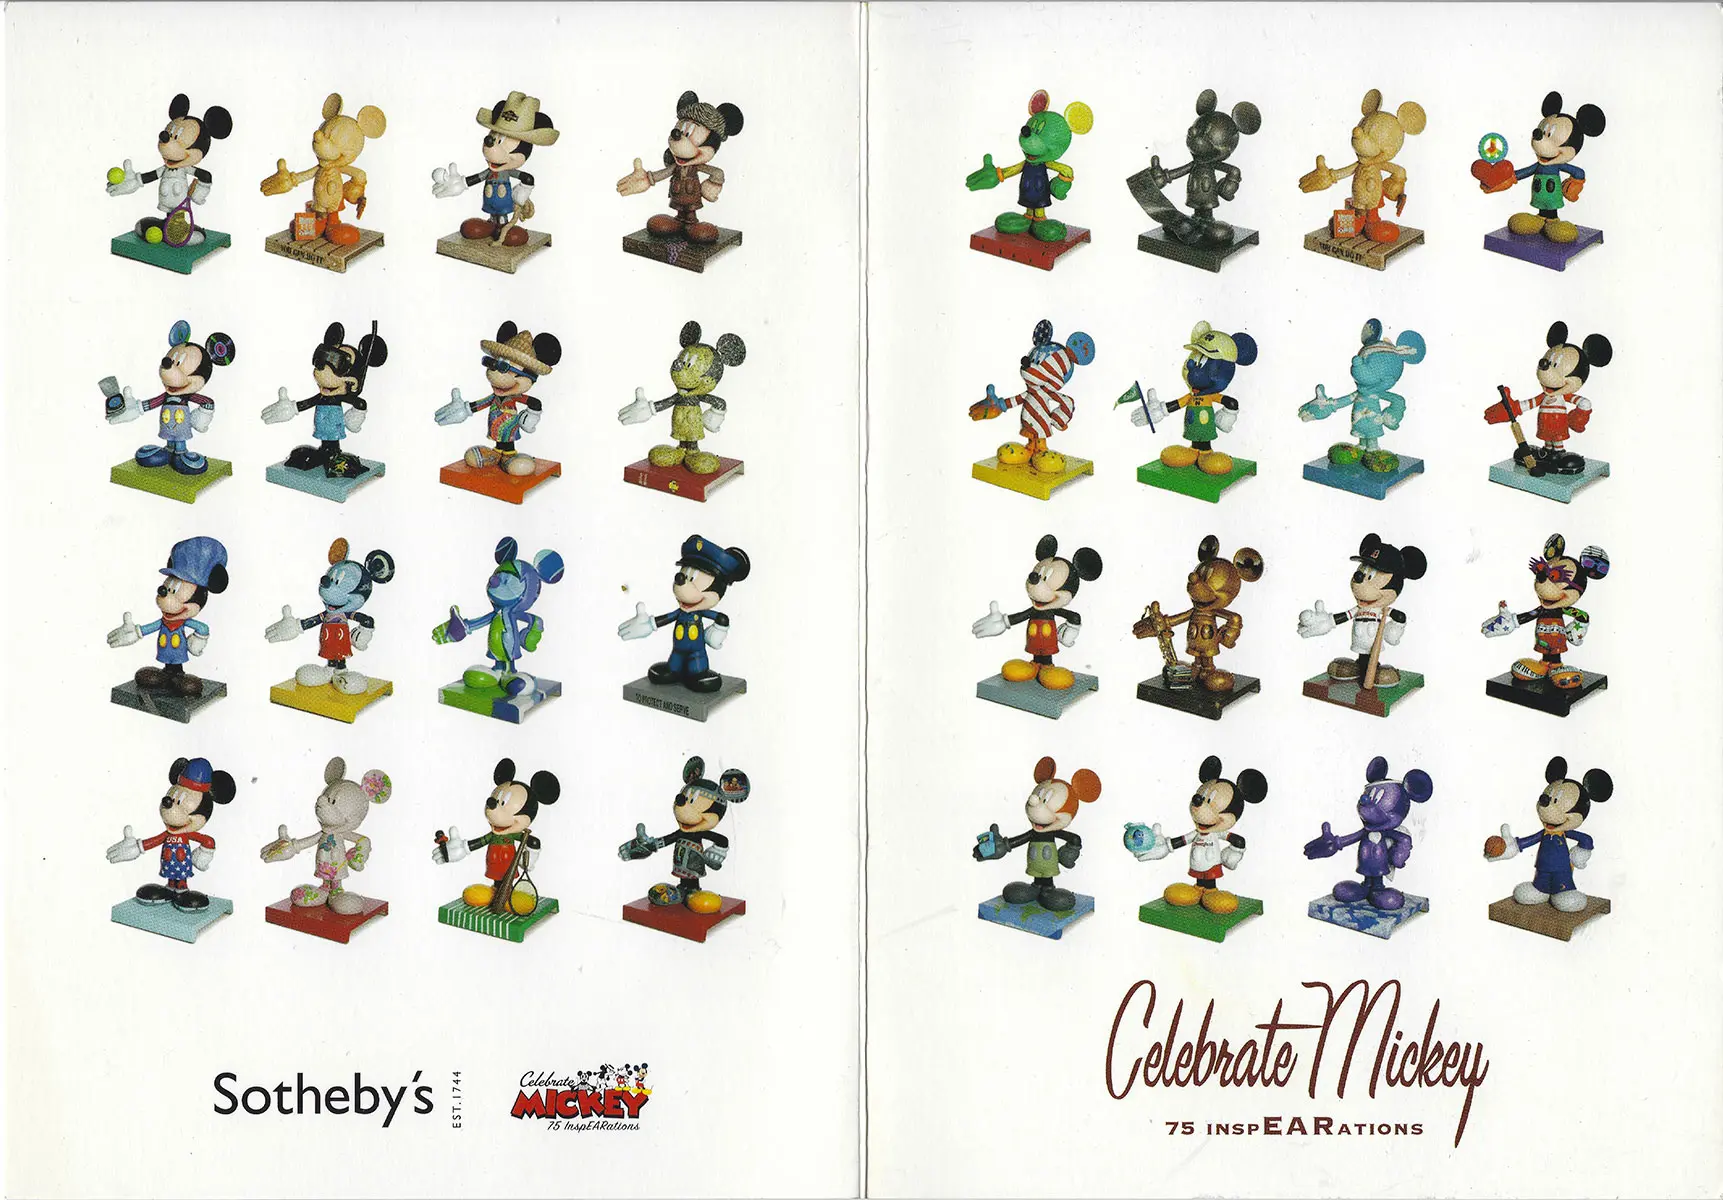 Sotheby's Mickey Mouse 75th Anniversary Statue Auction, September 2005, 1 of 2